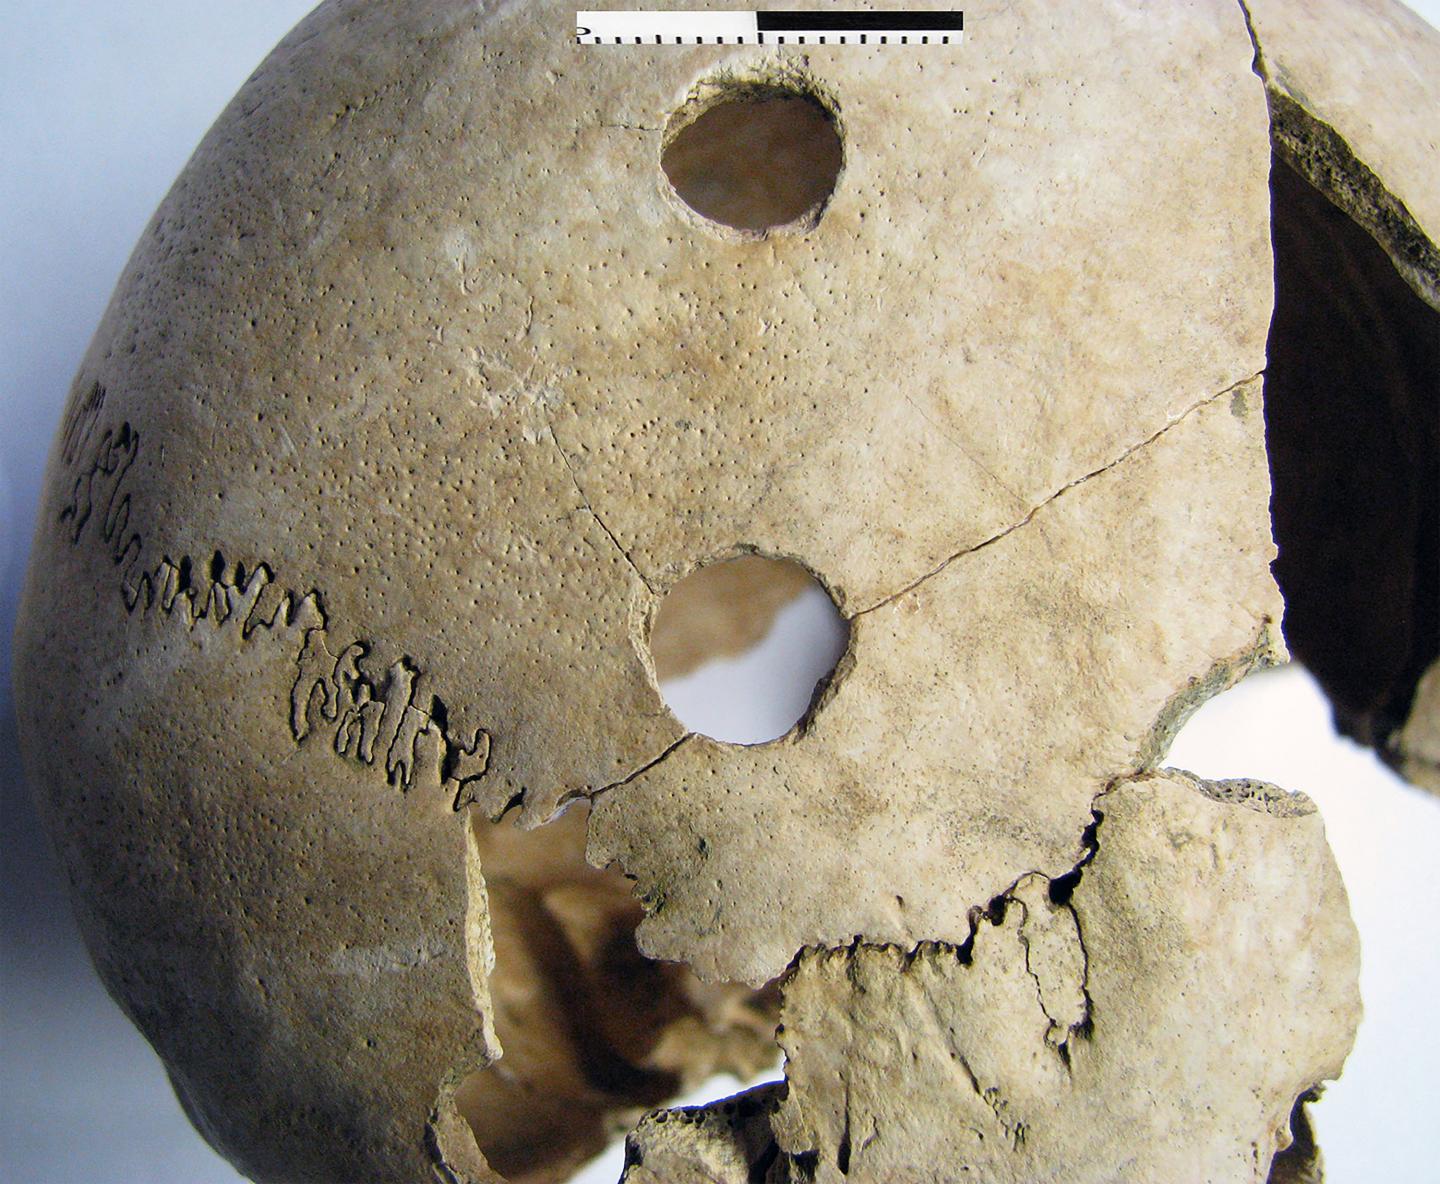 Penetrating wounds found on the skull of a young adult female.  (Image: Mario Novak, Institute for Anthropological Research)